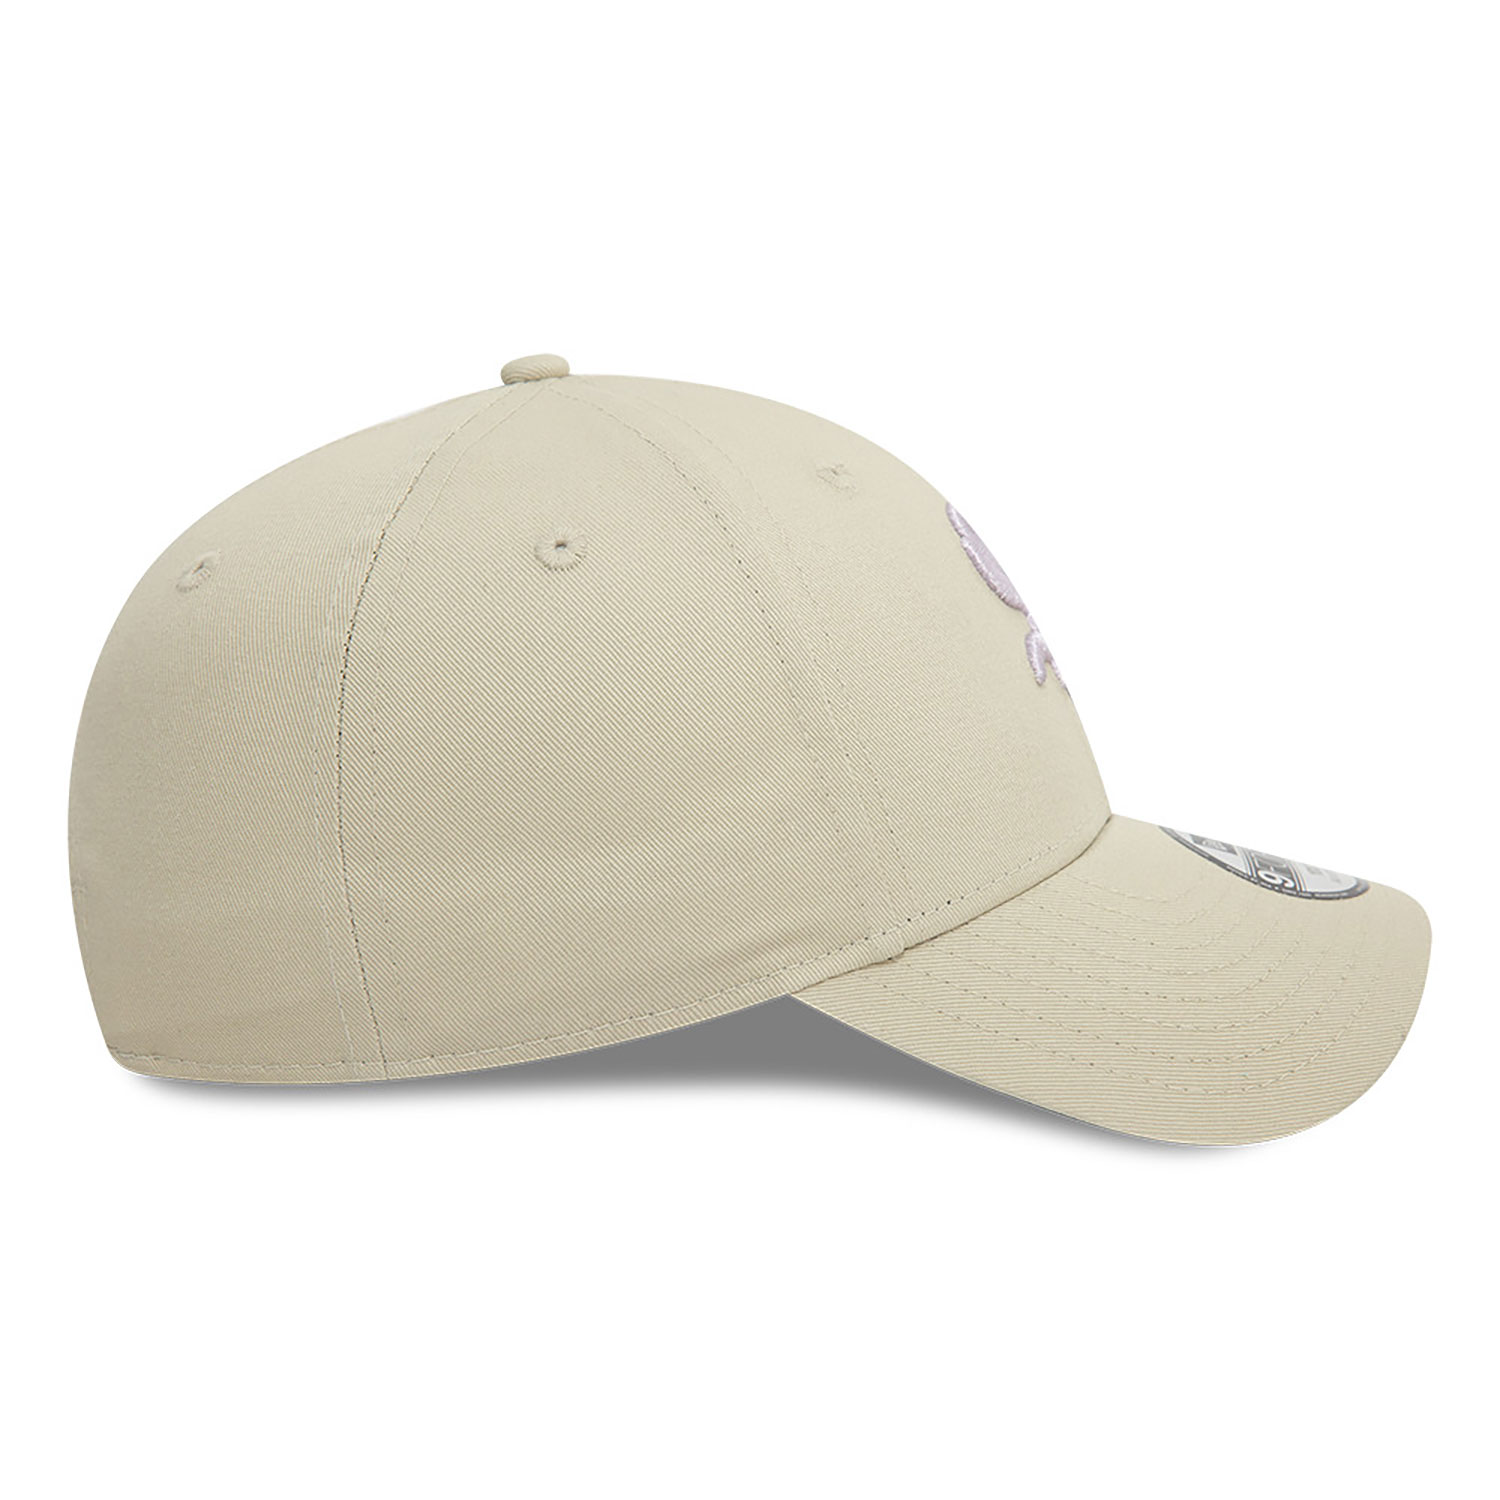 Chicago White Sox Youth Purple Icon Light Beige 9FORTY Adjustable Cap